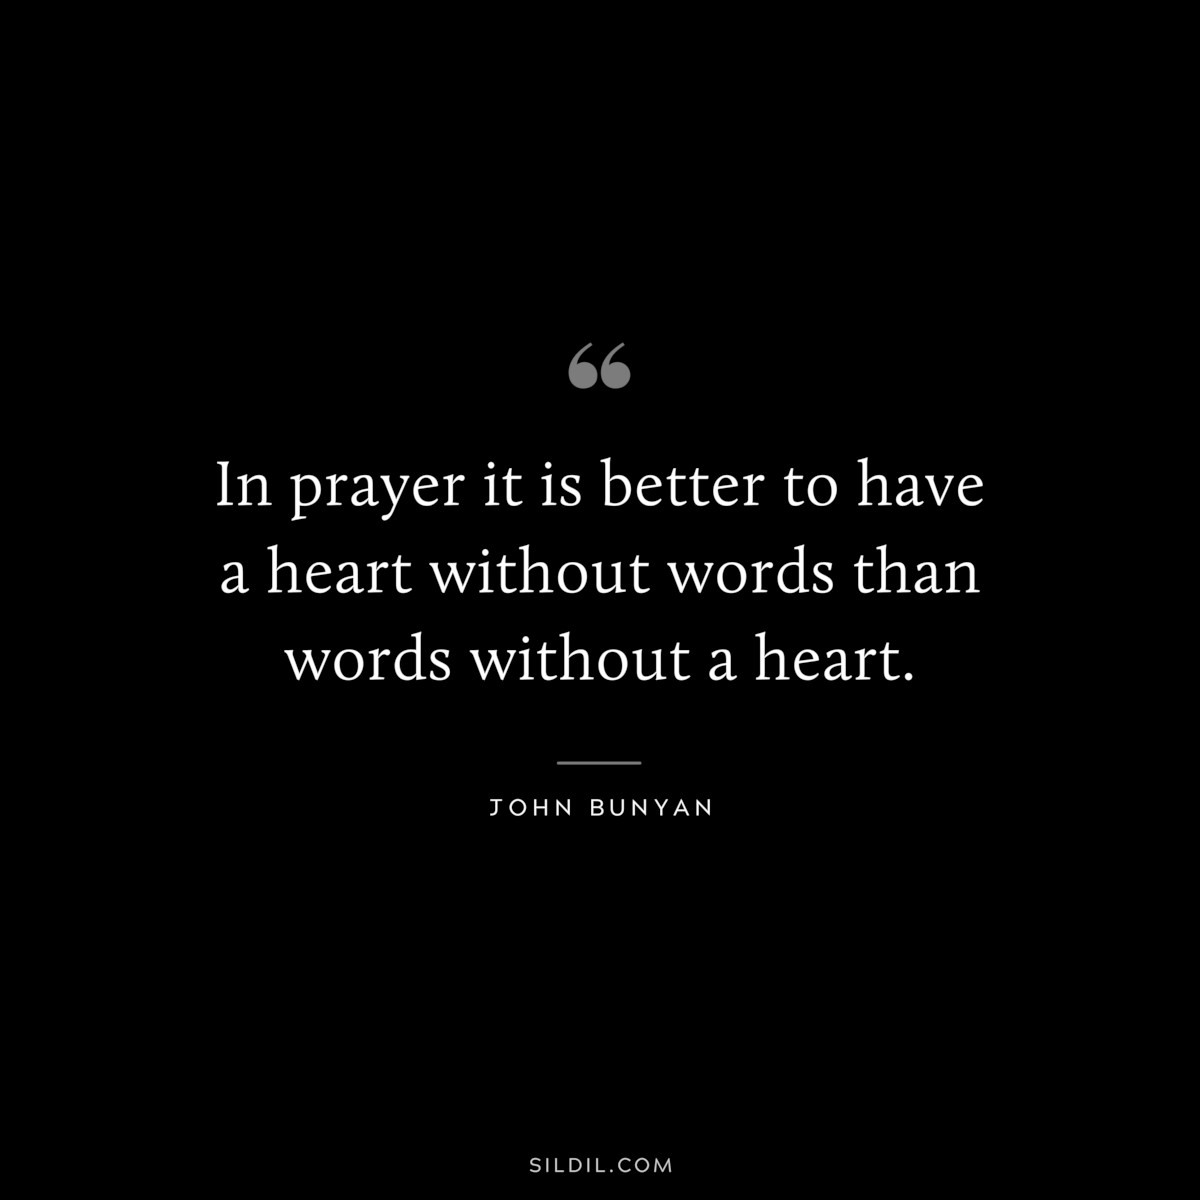 In prayer it is better to have a heart without words than words without a heart. ― John Bunyan